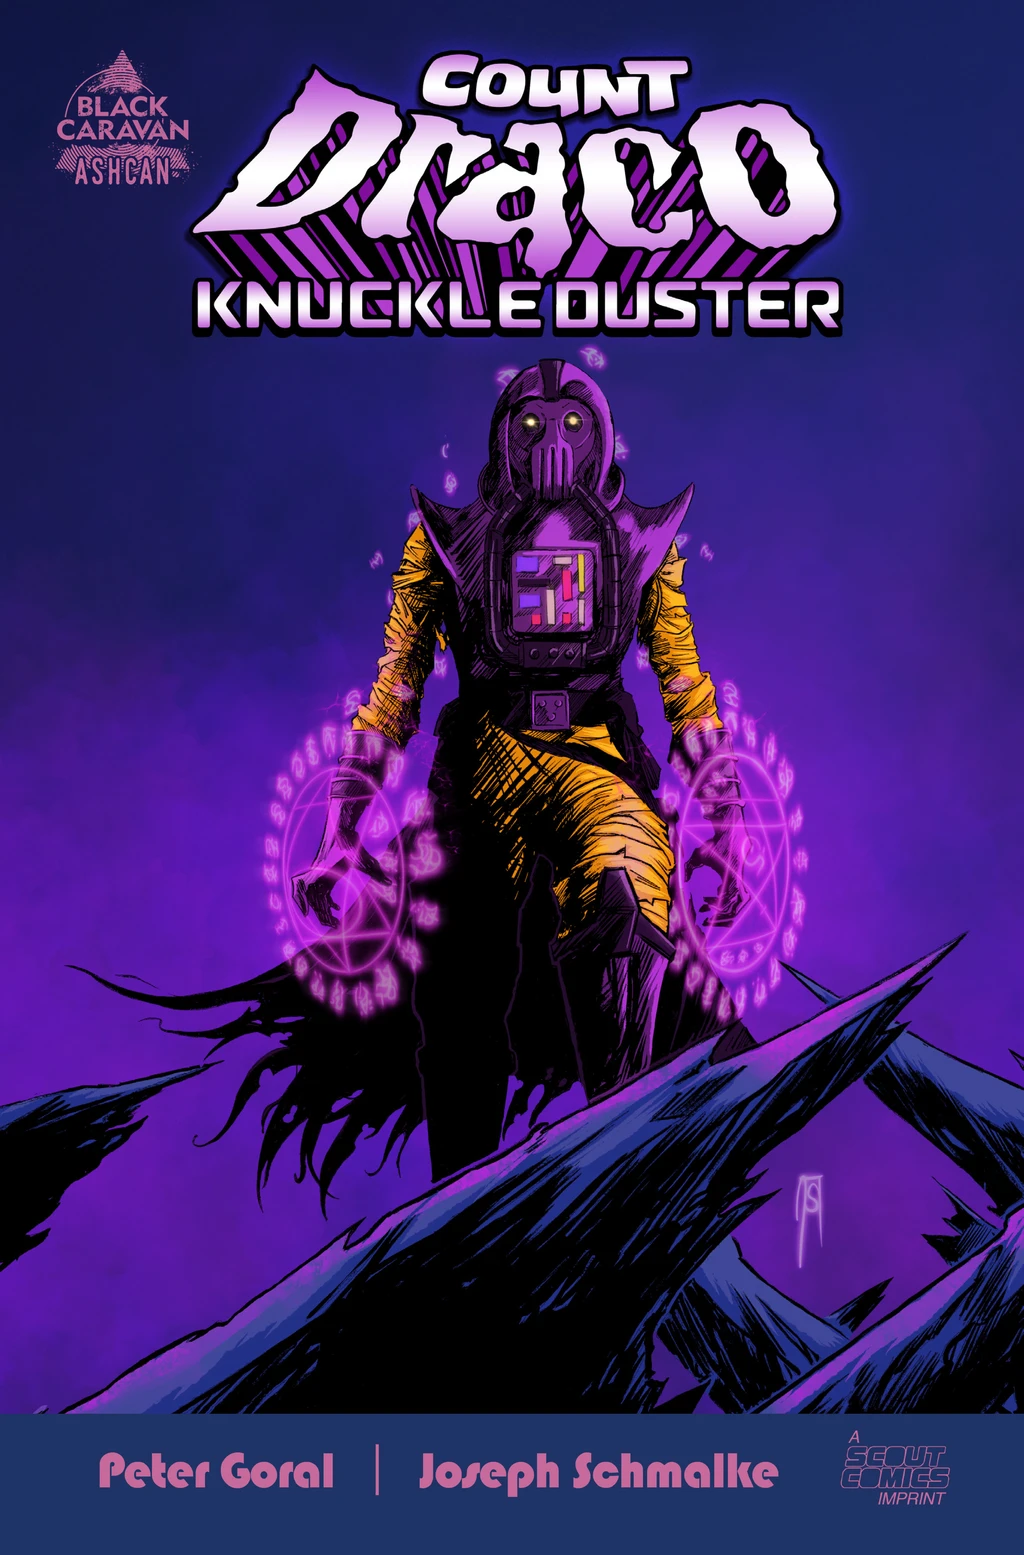 Count Draco Knuckleduster #1